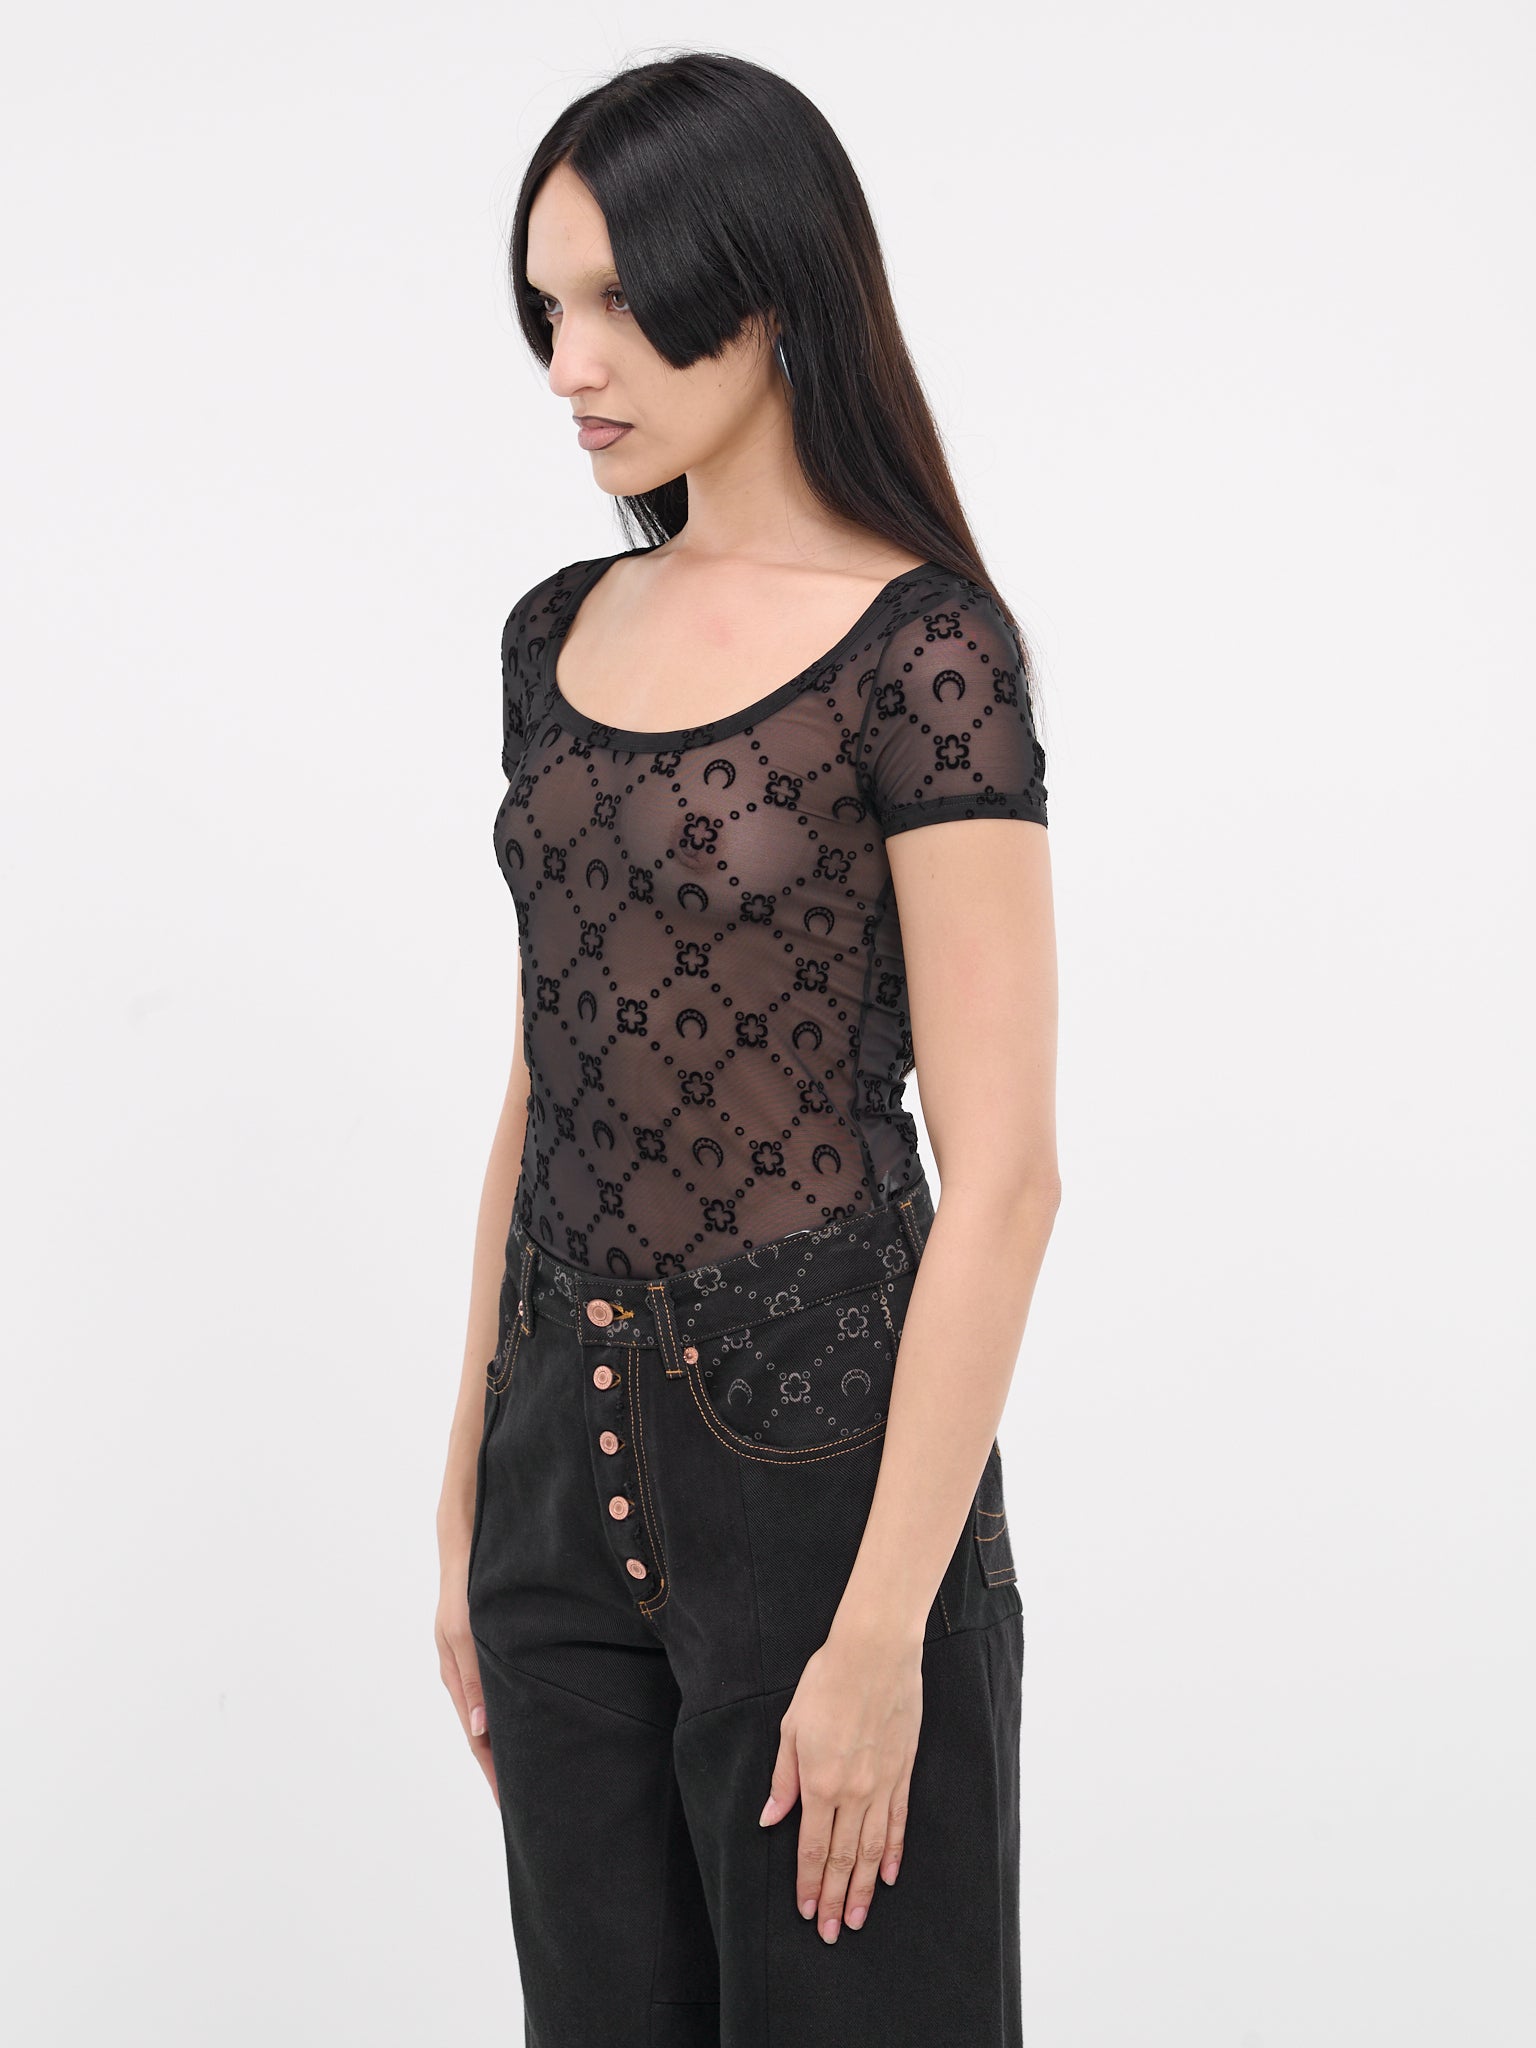 Monogram Mesh Fitted Top (WTO389-CJER0005-BLACK)